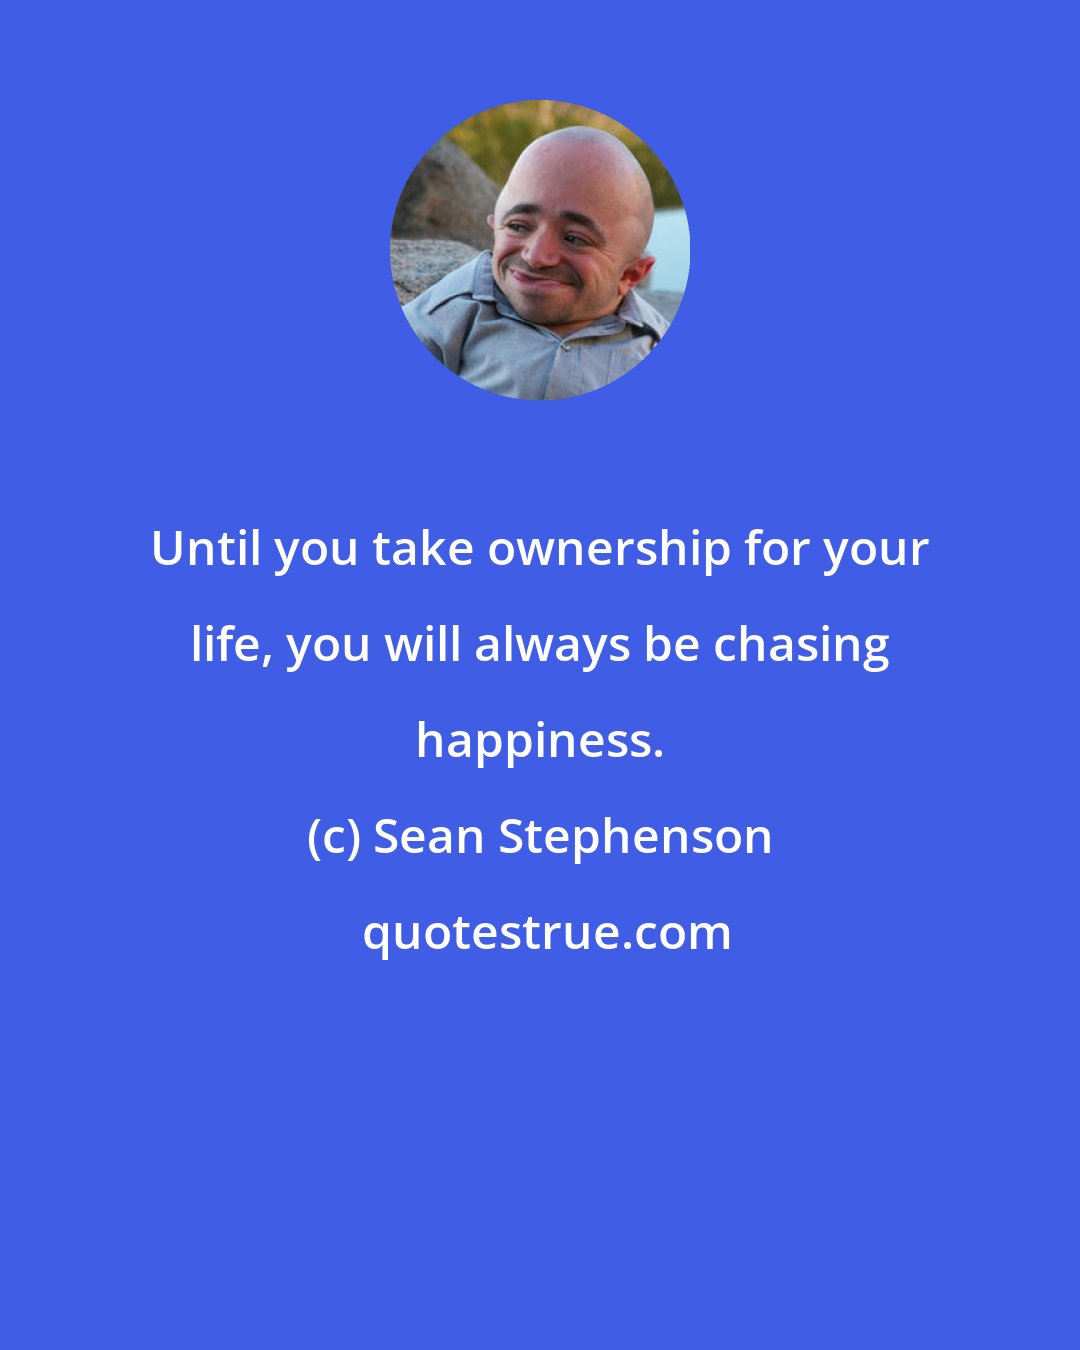 Sean Stephenson: Until you take ownership for your life, you will always be chasing happiness.